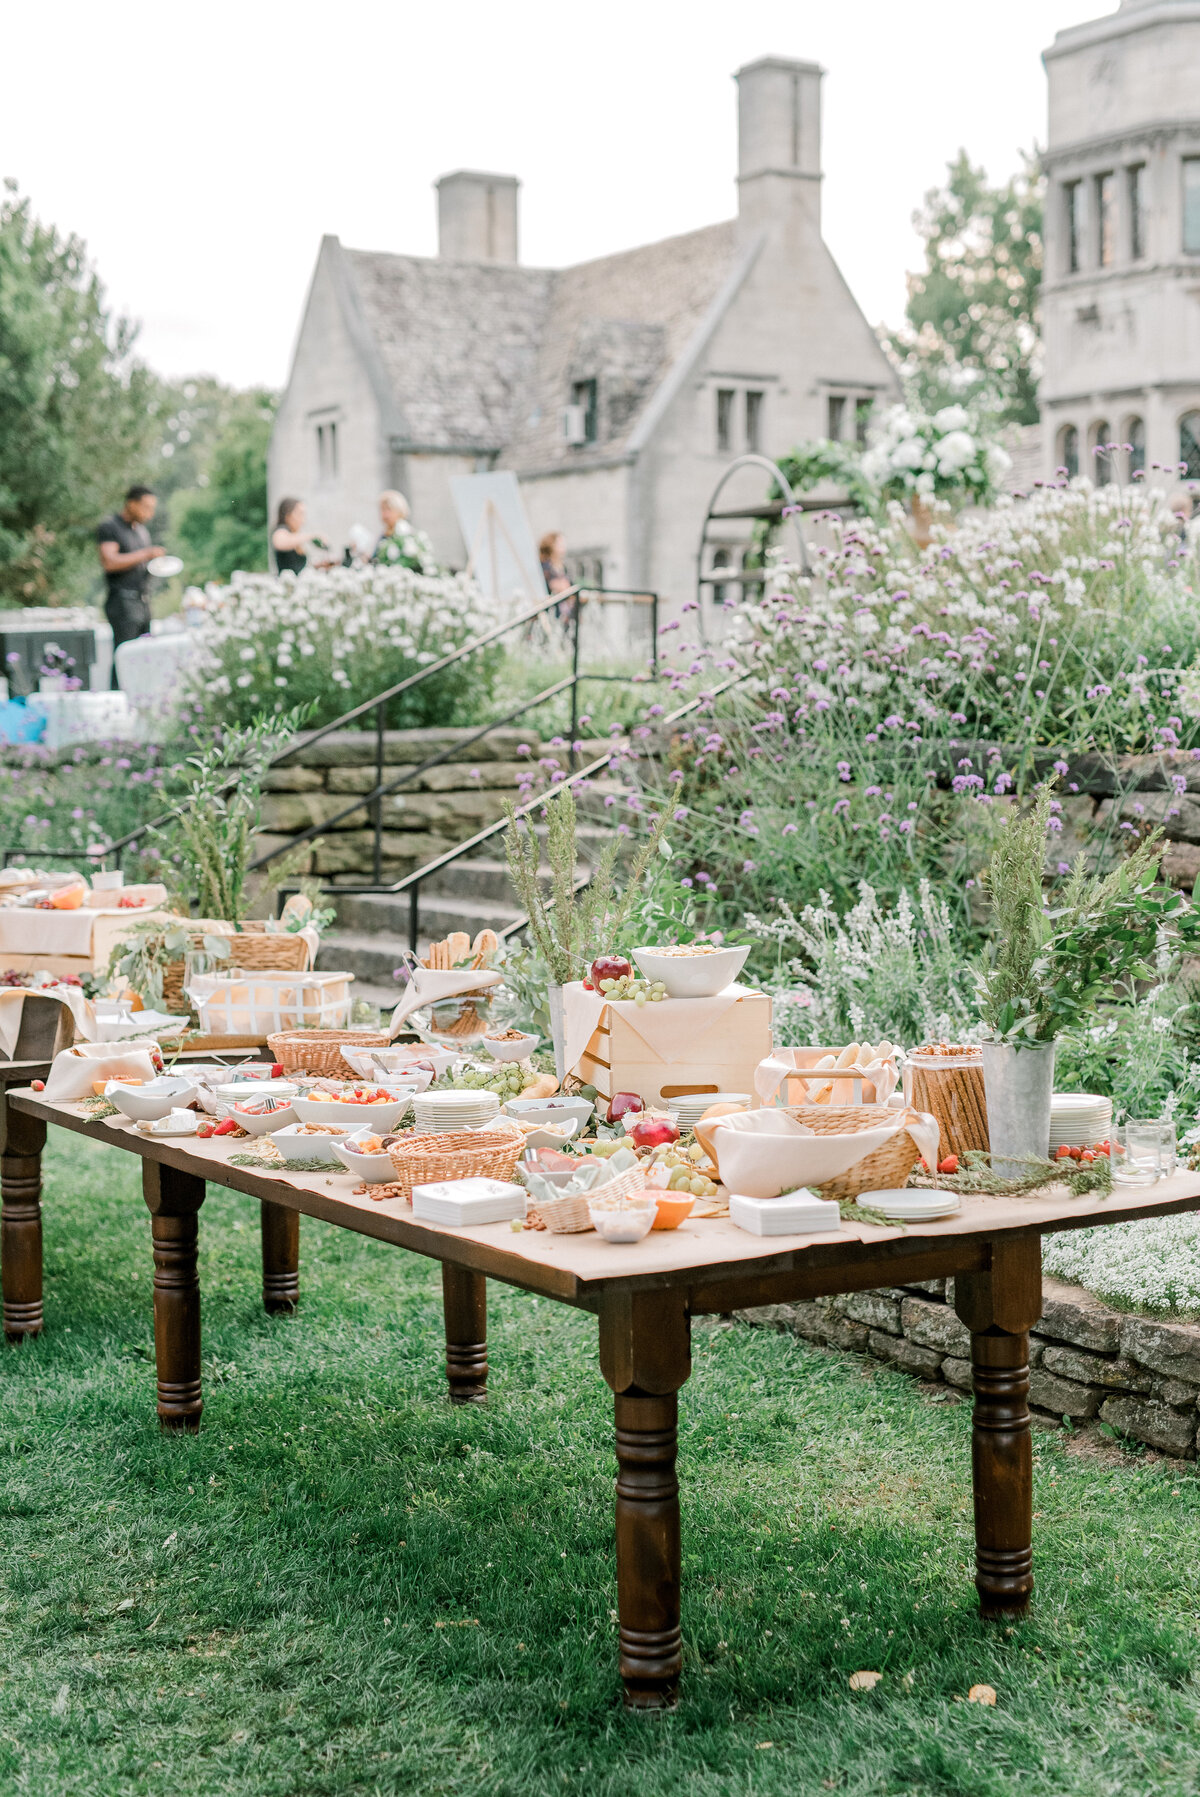 Hartwood Acres Mansion wedding chartcuterie table